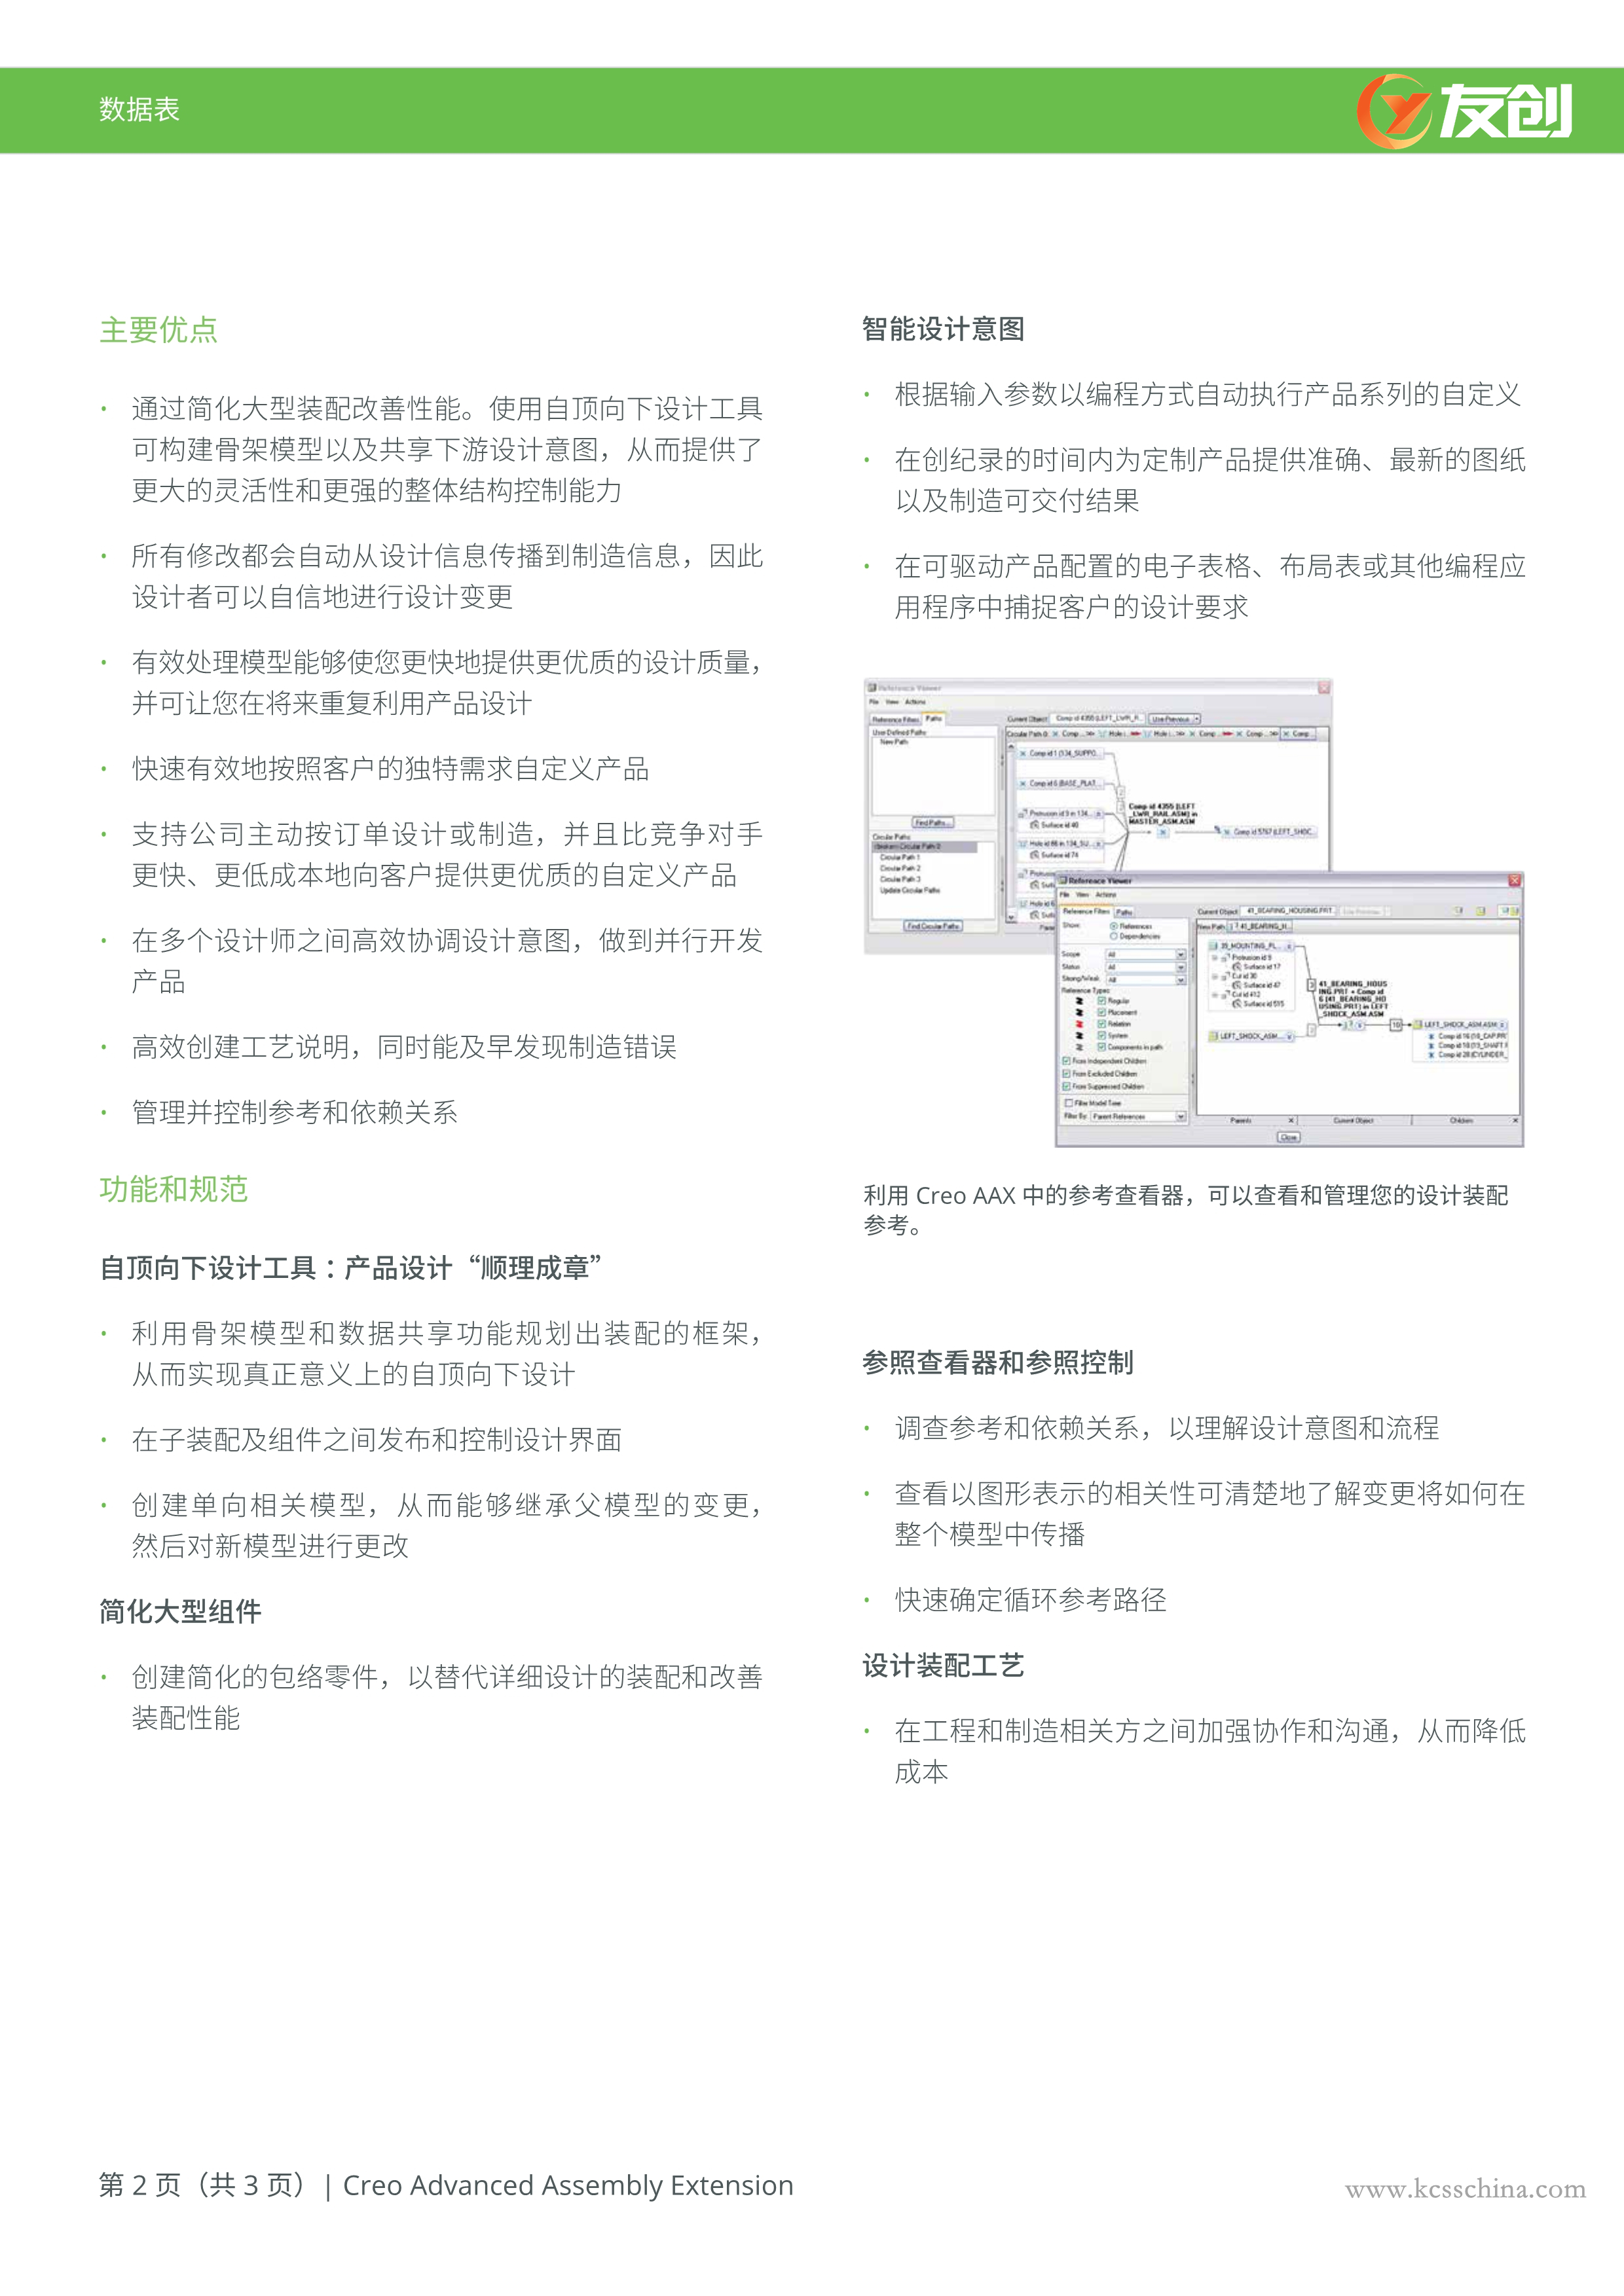 Creo Advanced Assembly Extension Data Sheet (Simplified Chinese)_2_副本.jpg